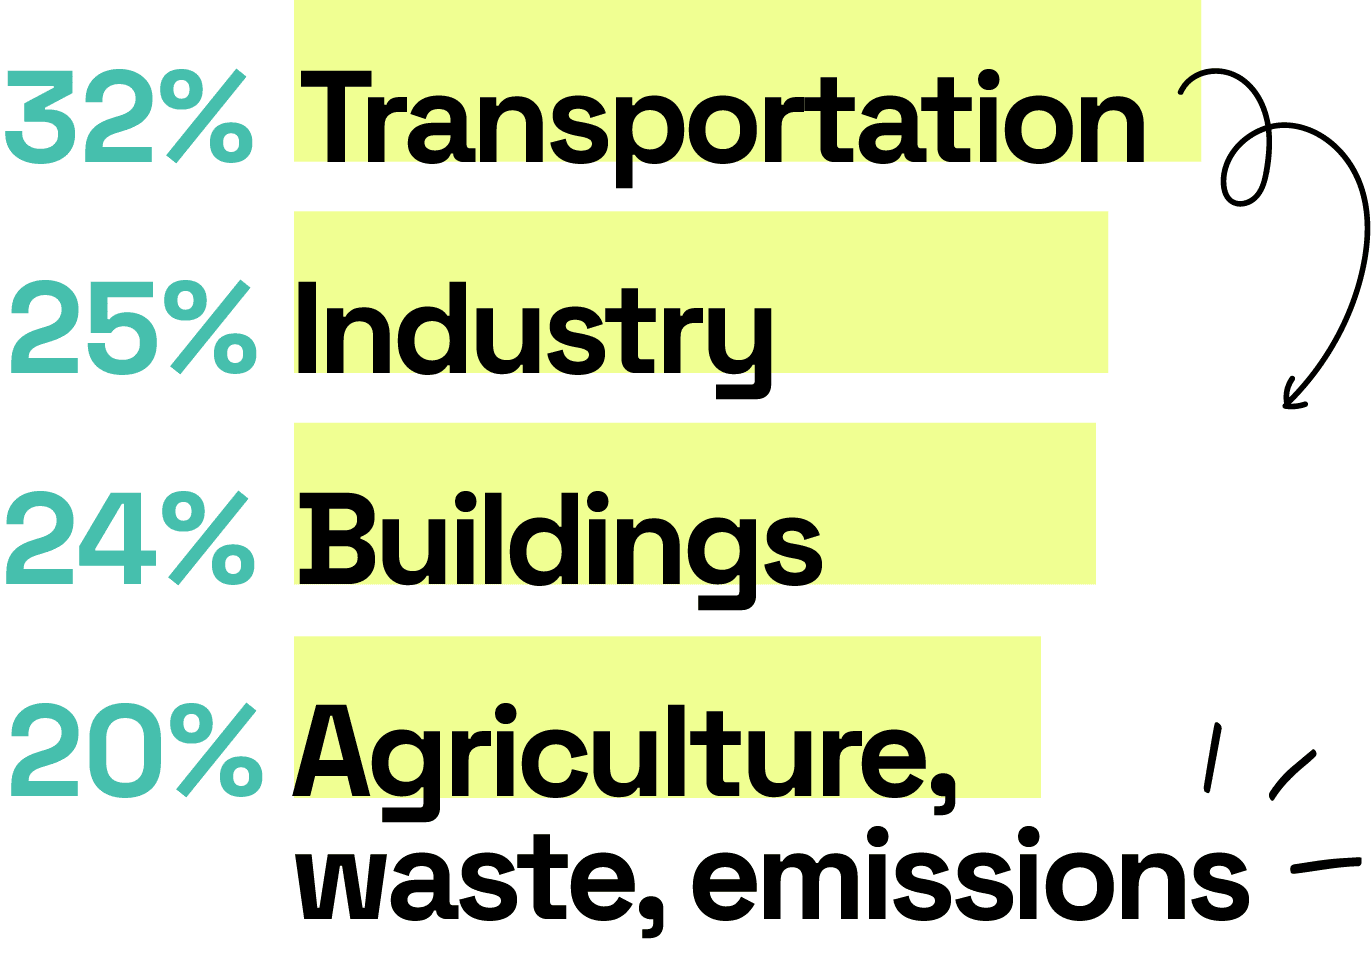 Causes of greenhouse gas emissions in Switzerland: 32 % by transport (excluding international air and sea transport), 24 % by buildings, 25 % by industry and 20 % by agriculture and waste treatment as well as synthetic gas emissions.